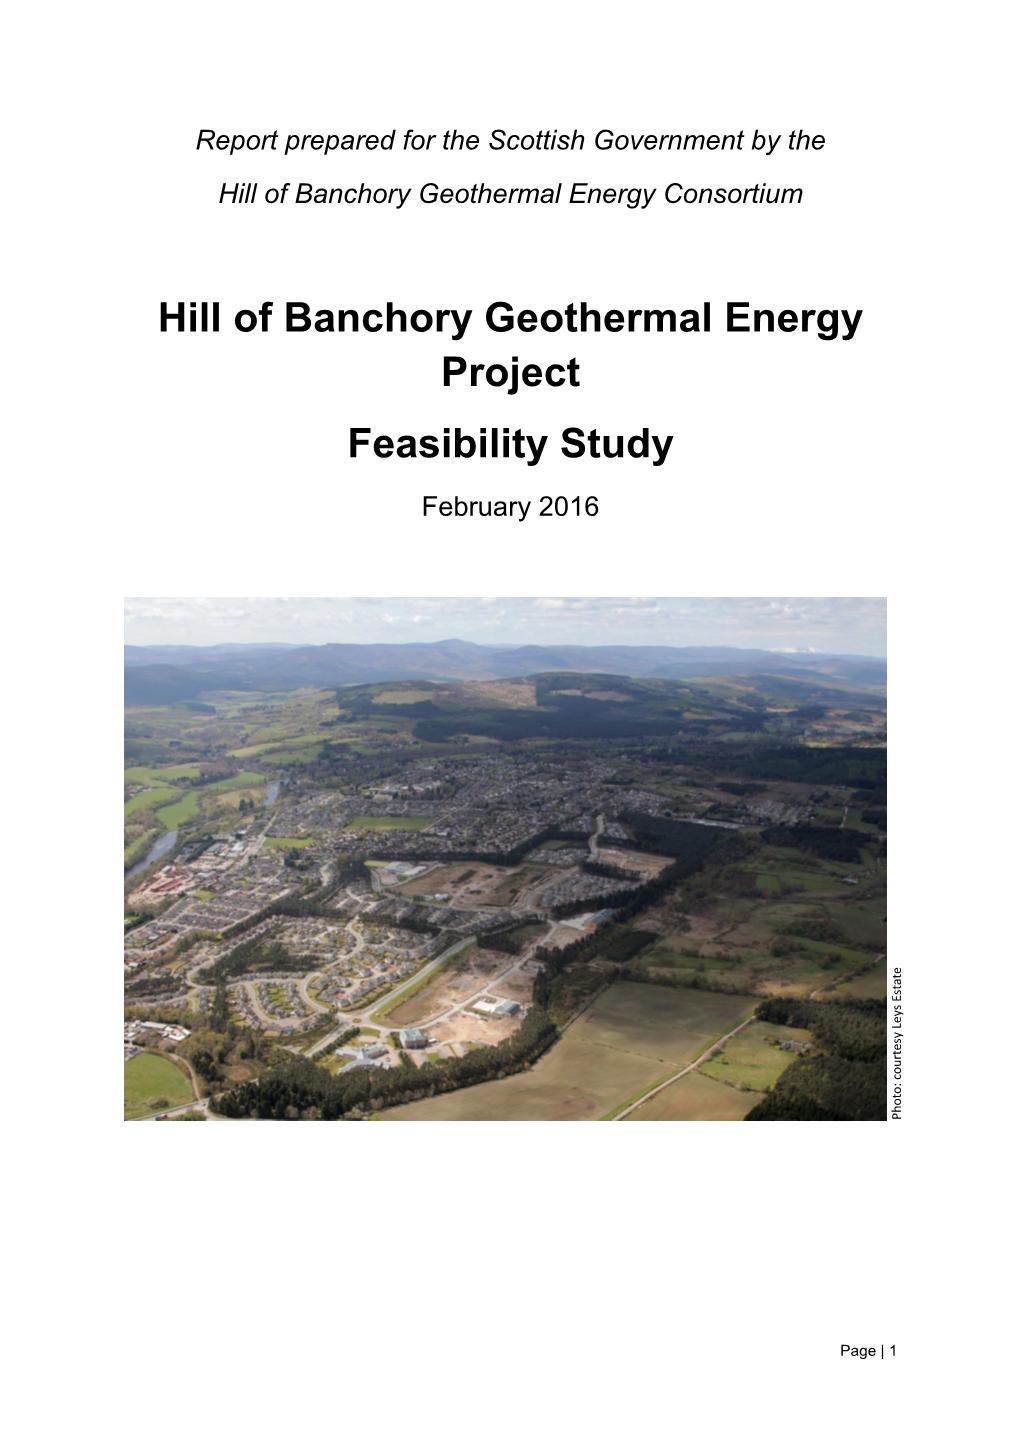 Hill of Banchory Geothermal Energy Project Feasibility Study